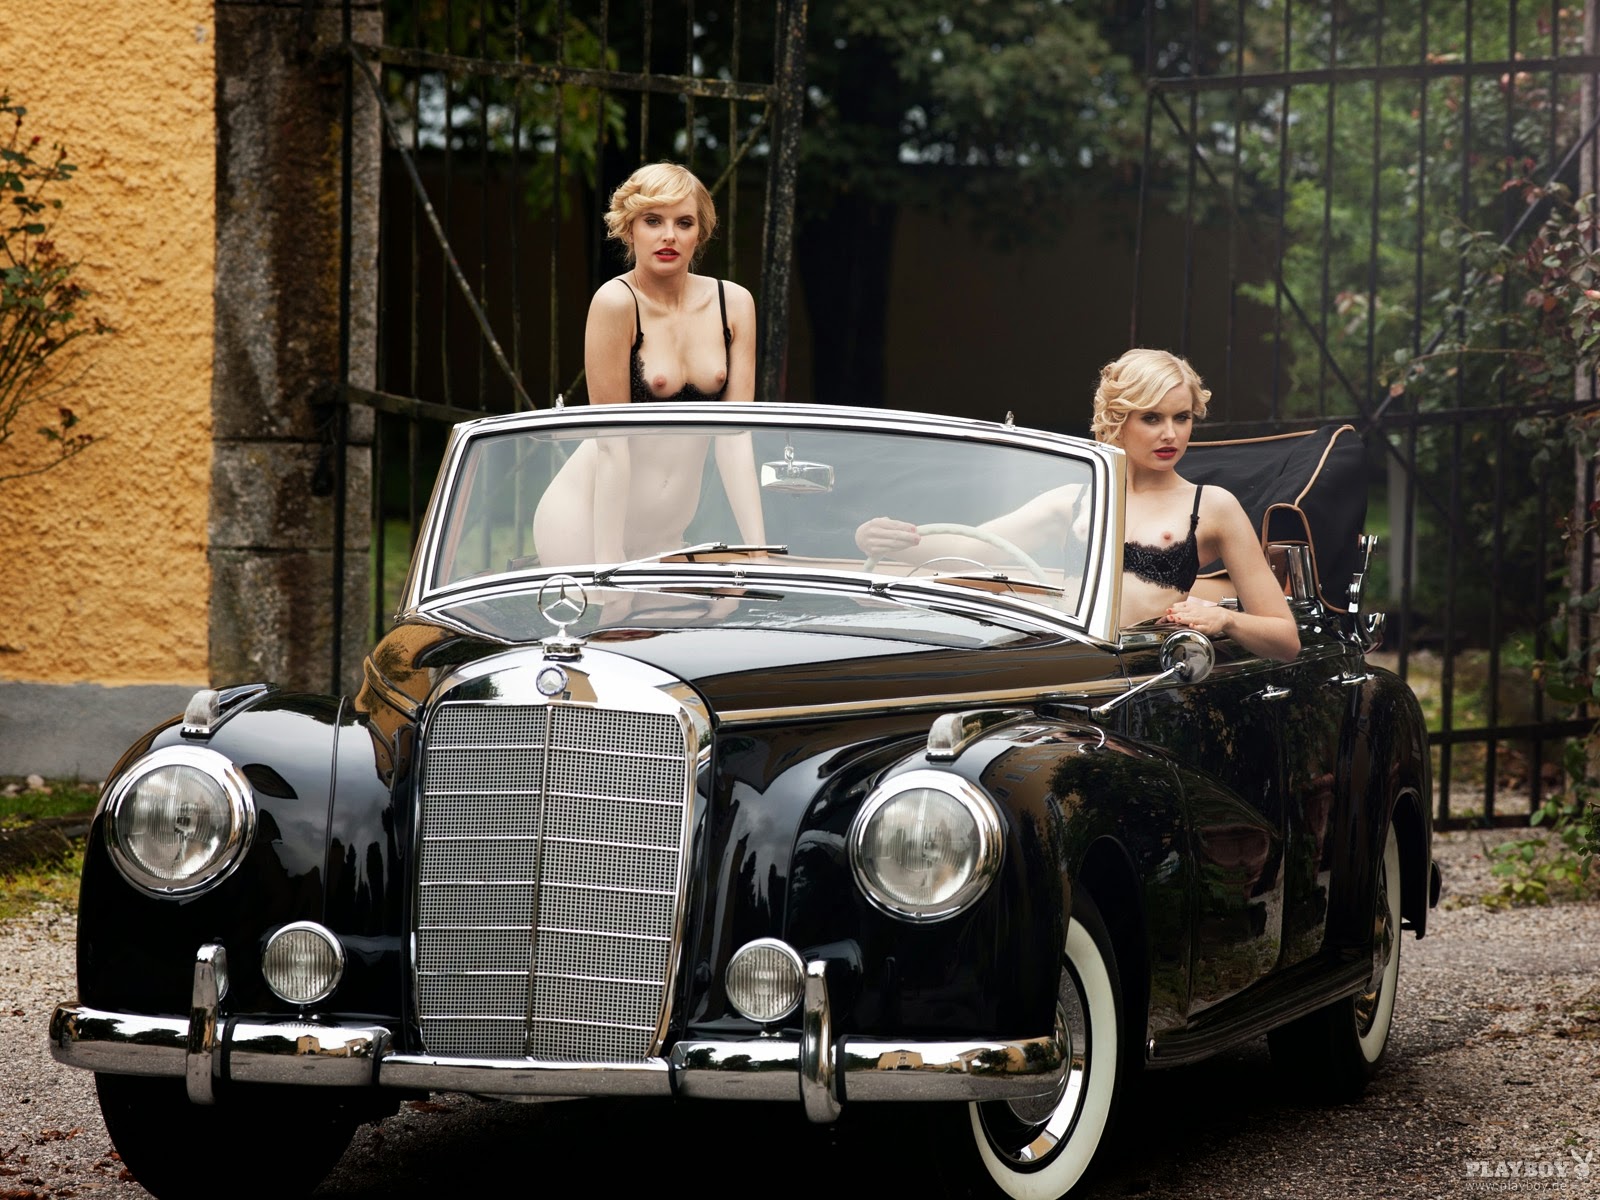 Vintage Classic Cars and Girls: Anna and Lisa Heyse - German Playmates of t...